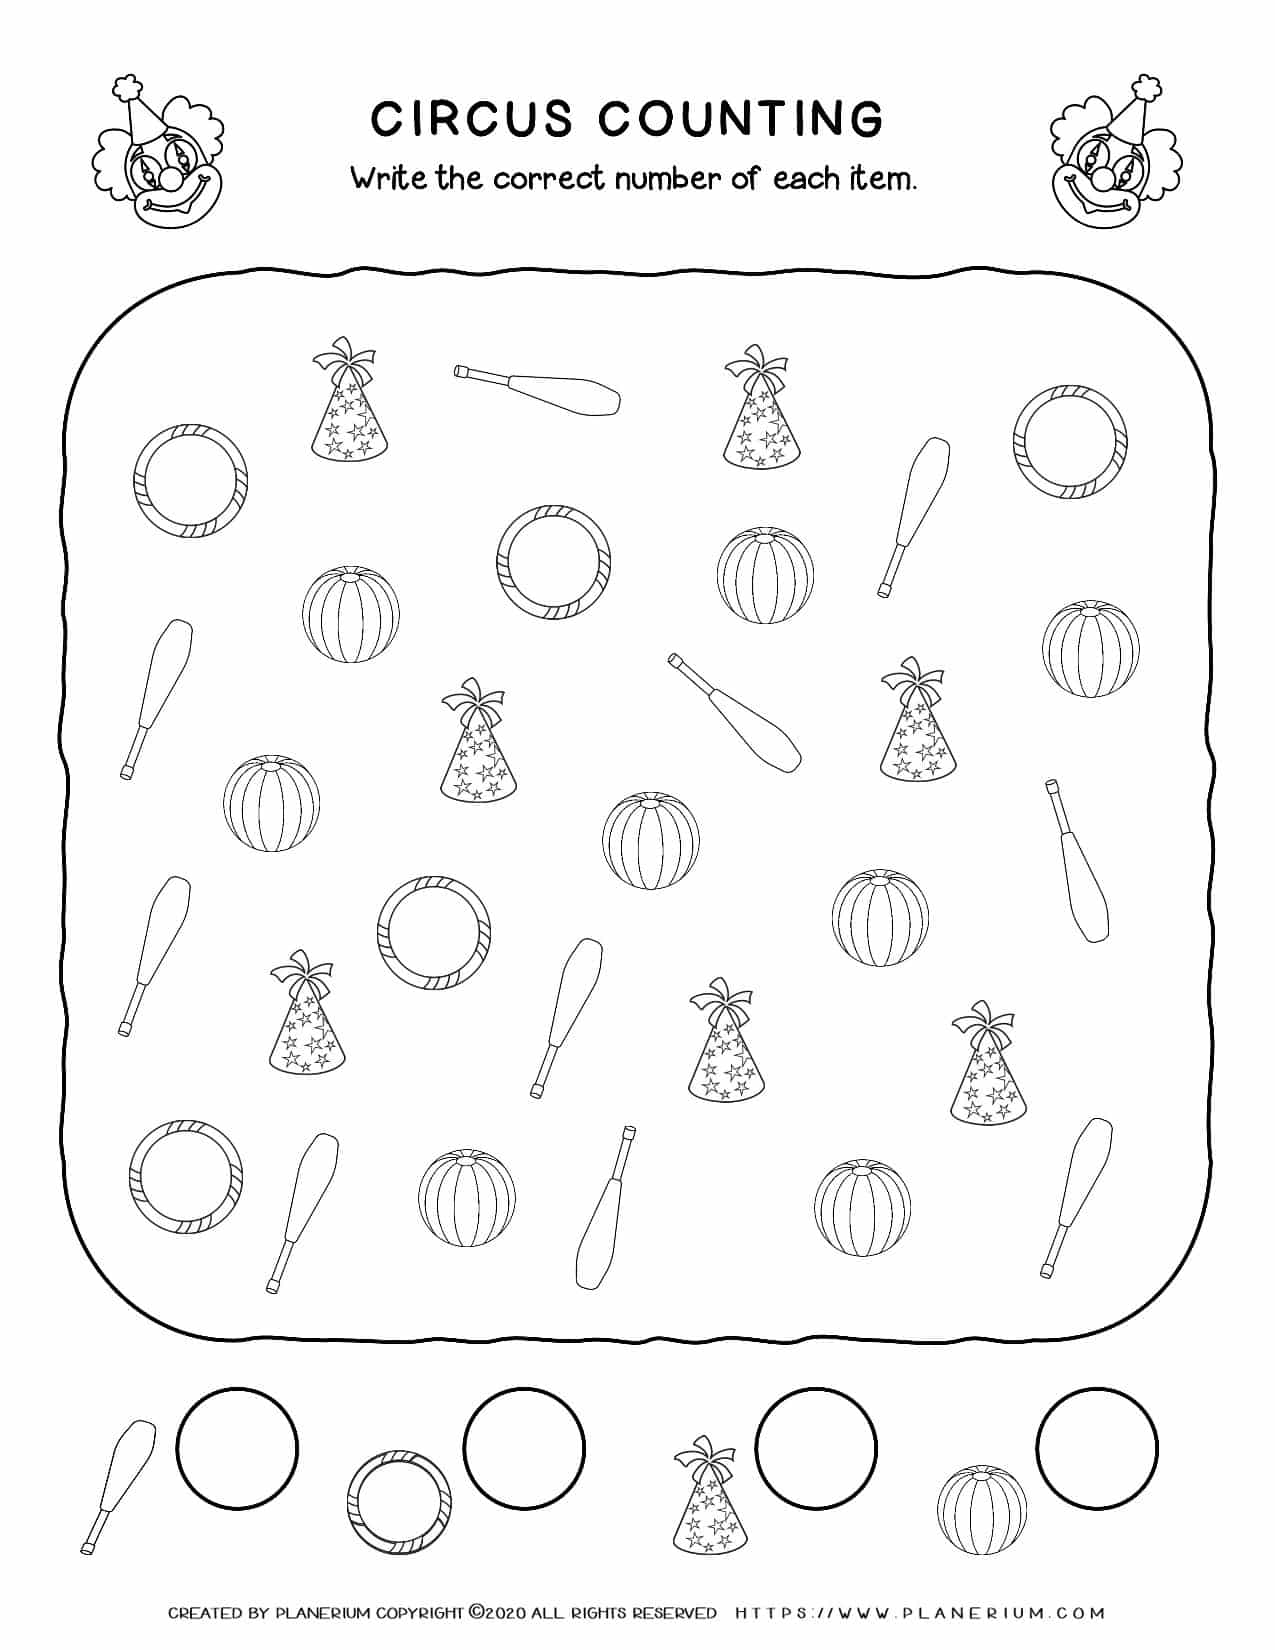 Circus Worksheet - Counting Objects | Planerium